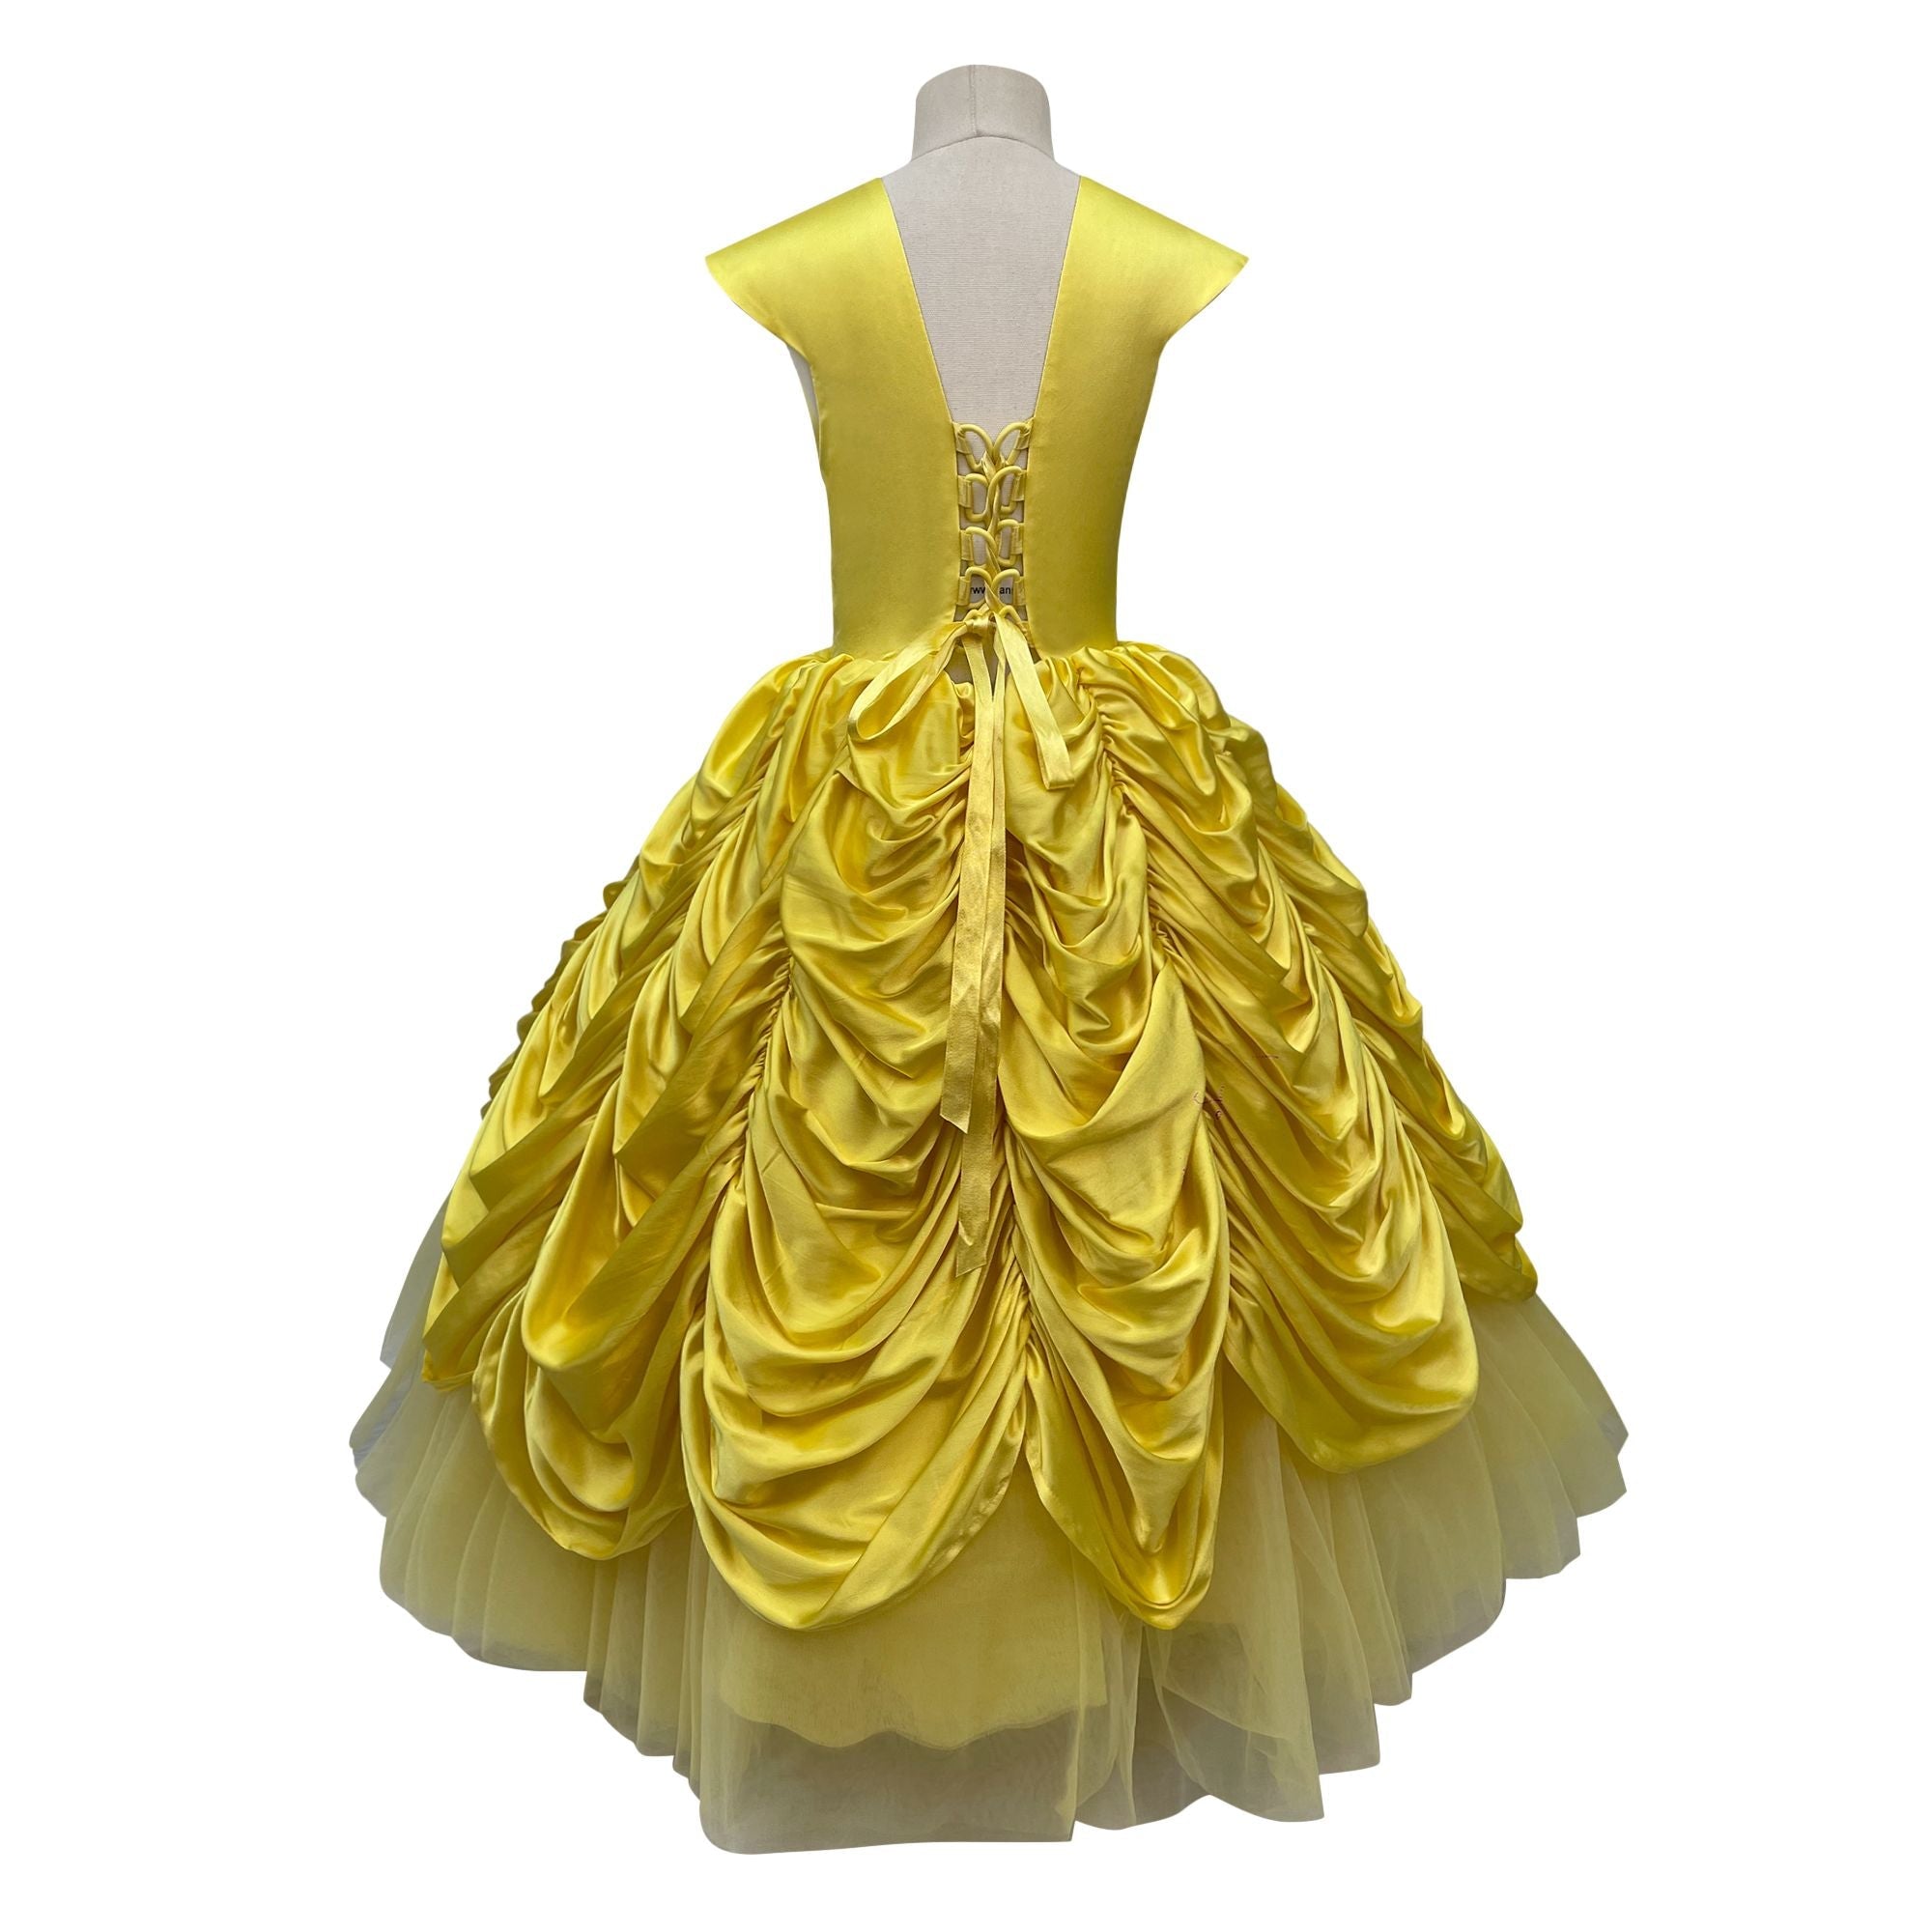 The Belle Gown